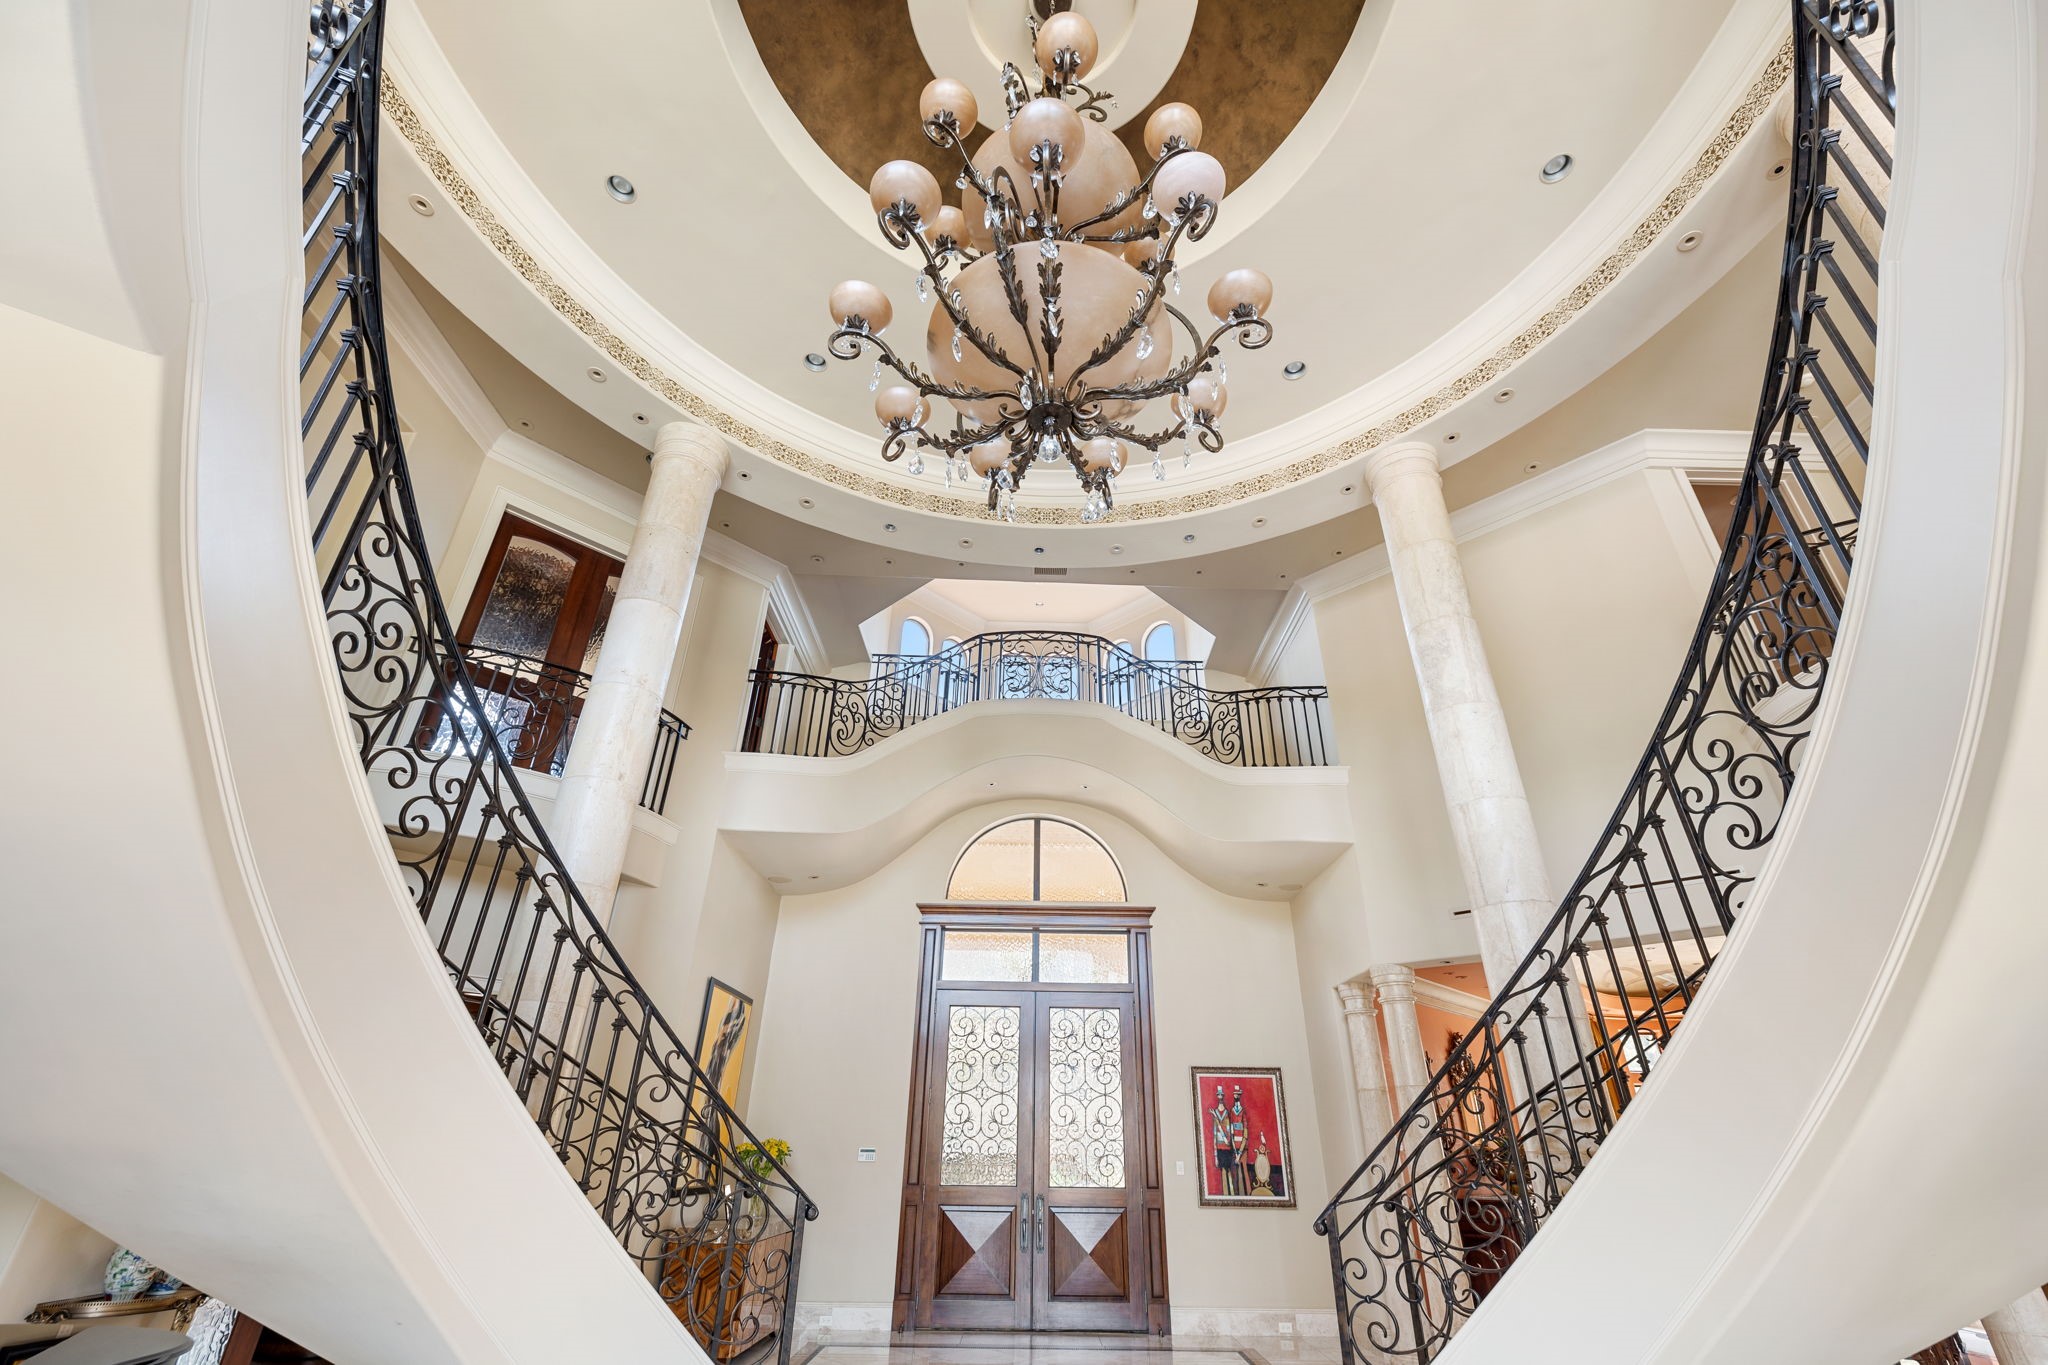 Every aspect of this estate is grand. Mahogany French doors open to the Sala d'Ingresso--the Grand Foyer featuring duple Iron & Teardrop Crystal Chandelier in a richly fauxed niiche with the Indoor Sky Bridge at the center.